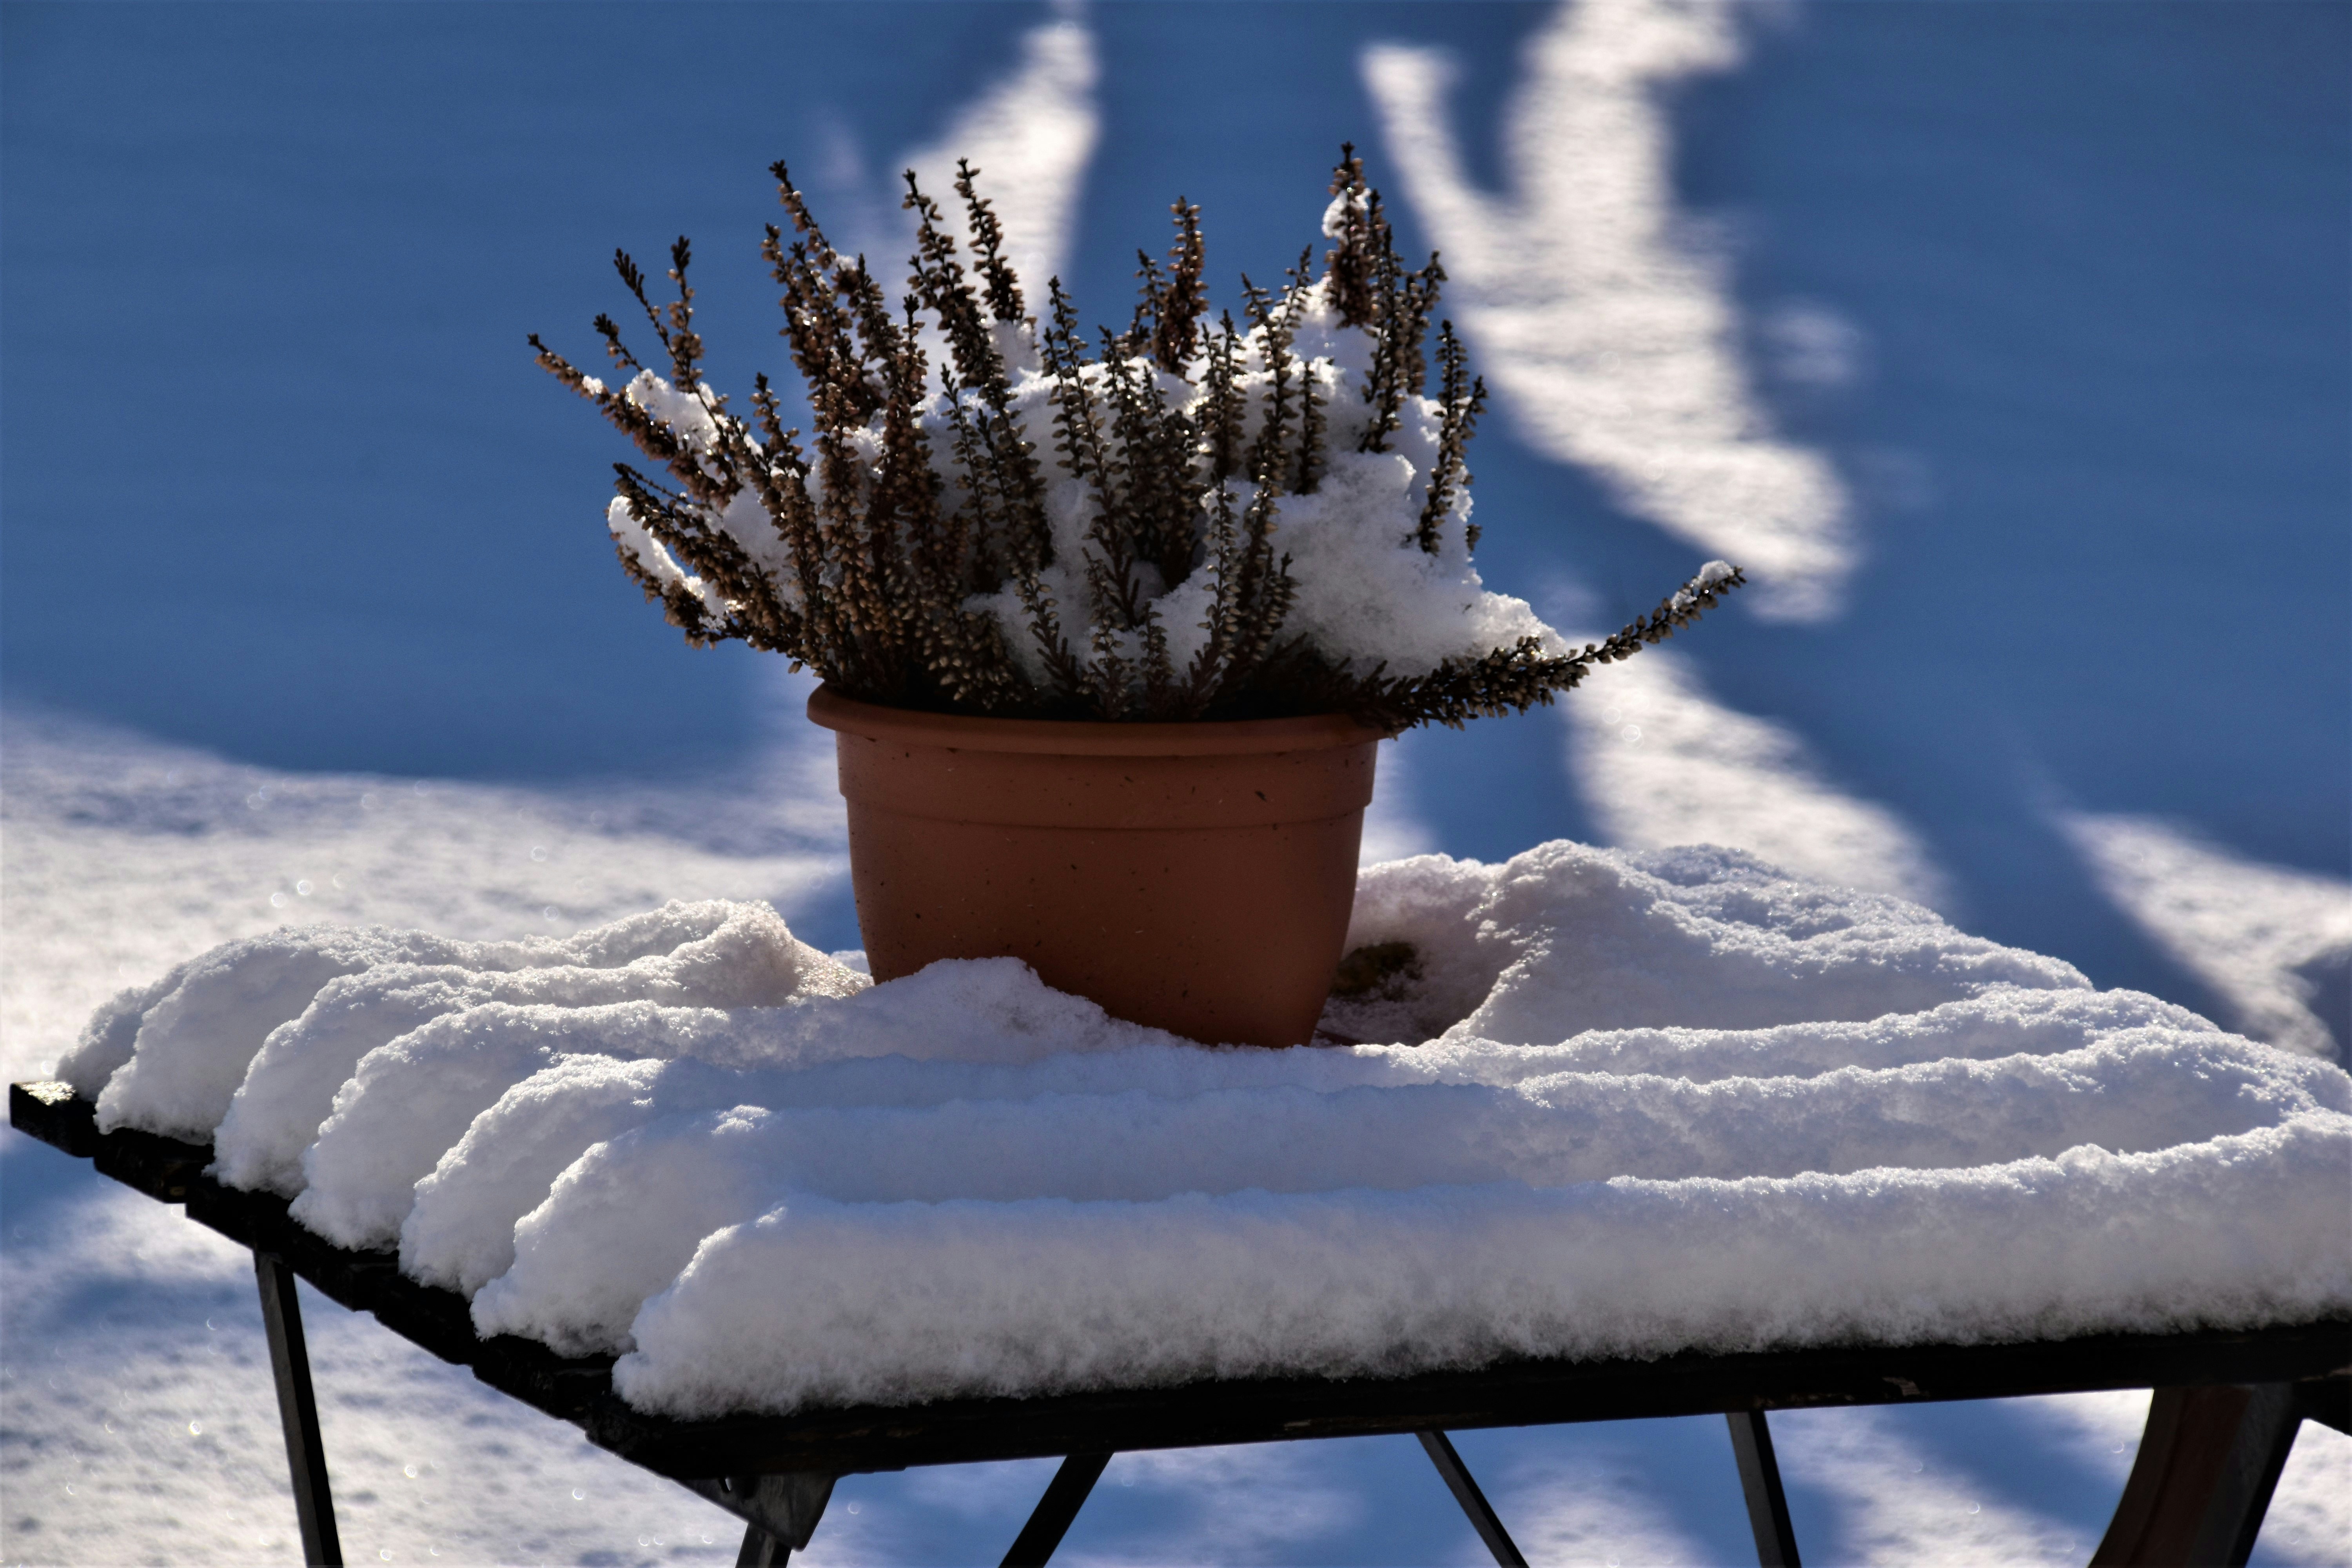 Snow on a garden table and plant.